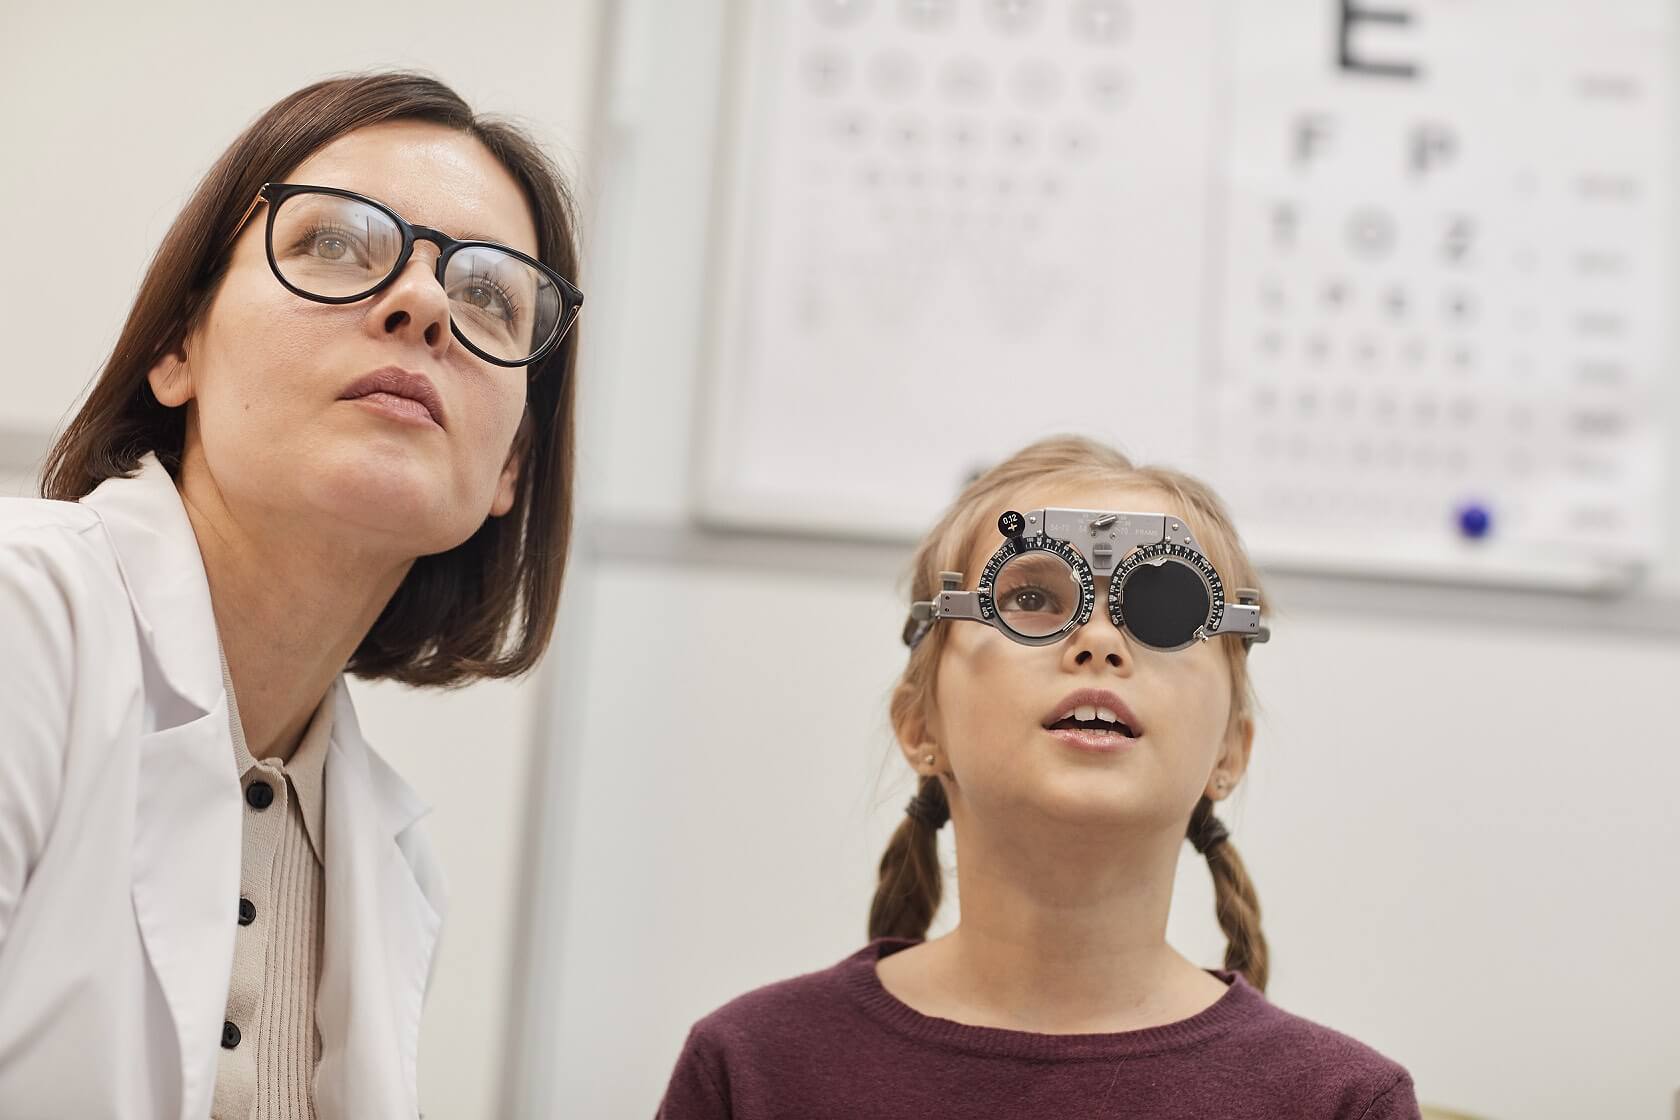 Eye Doctor and patient both looking at an eyechart